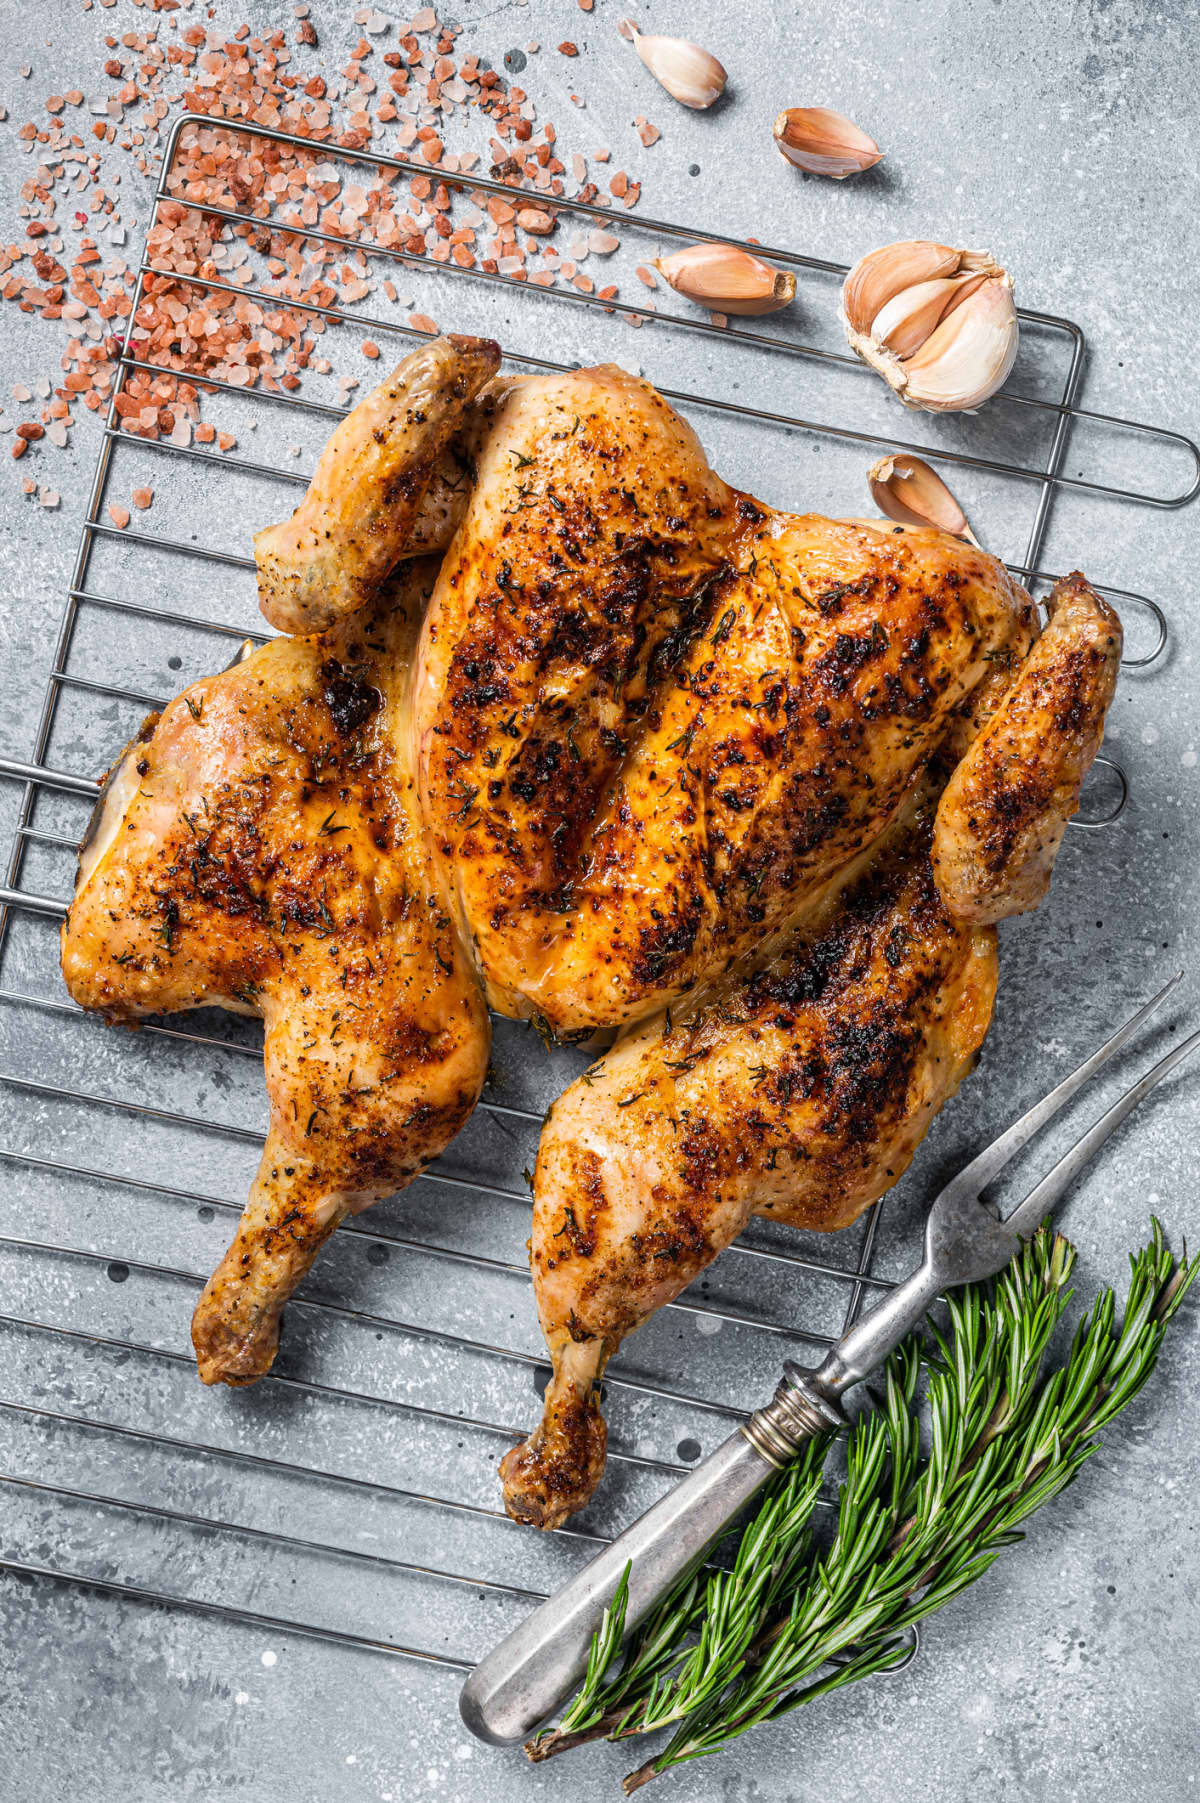 A spatchcocked chicken on the grill